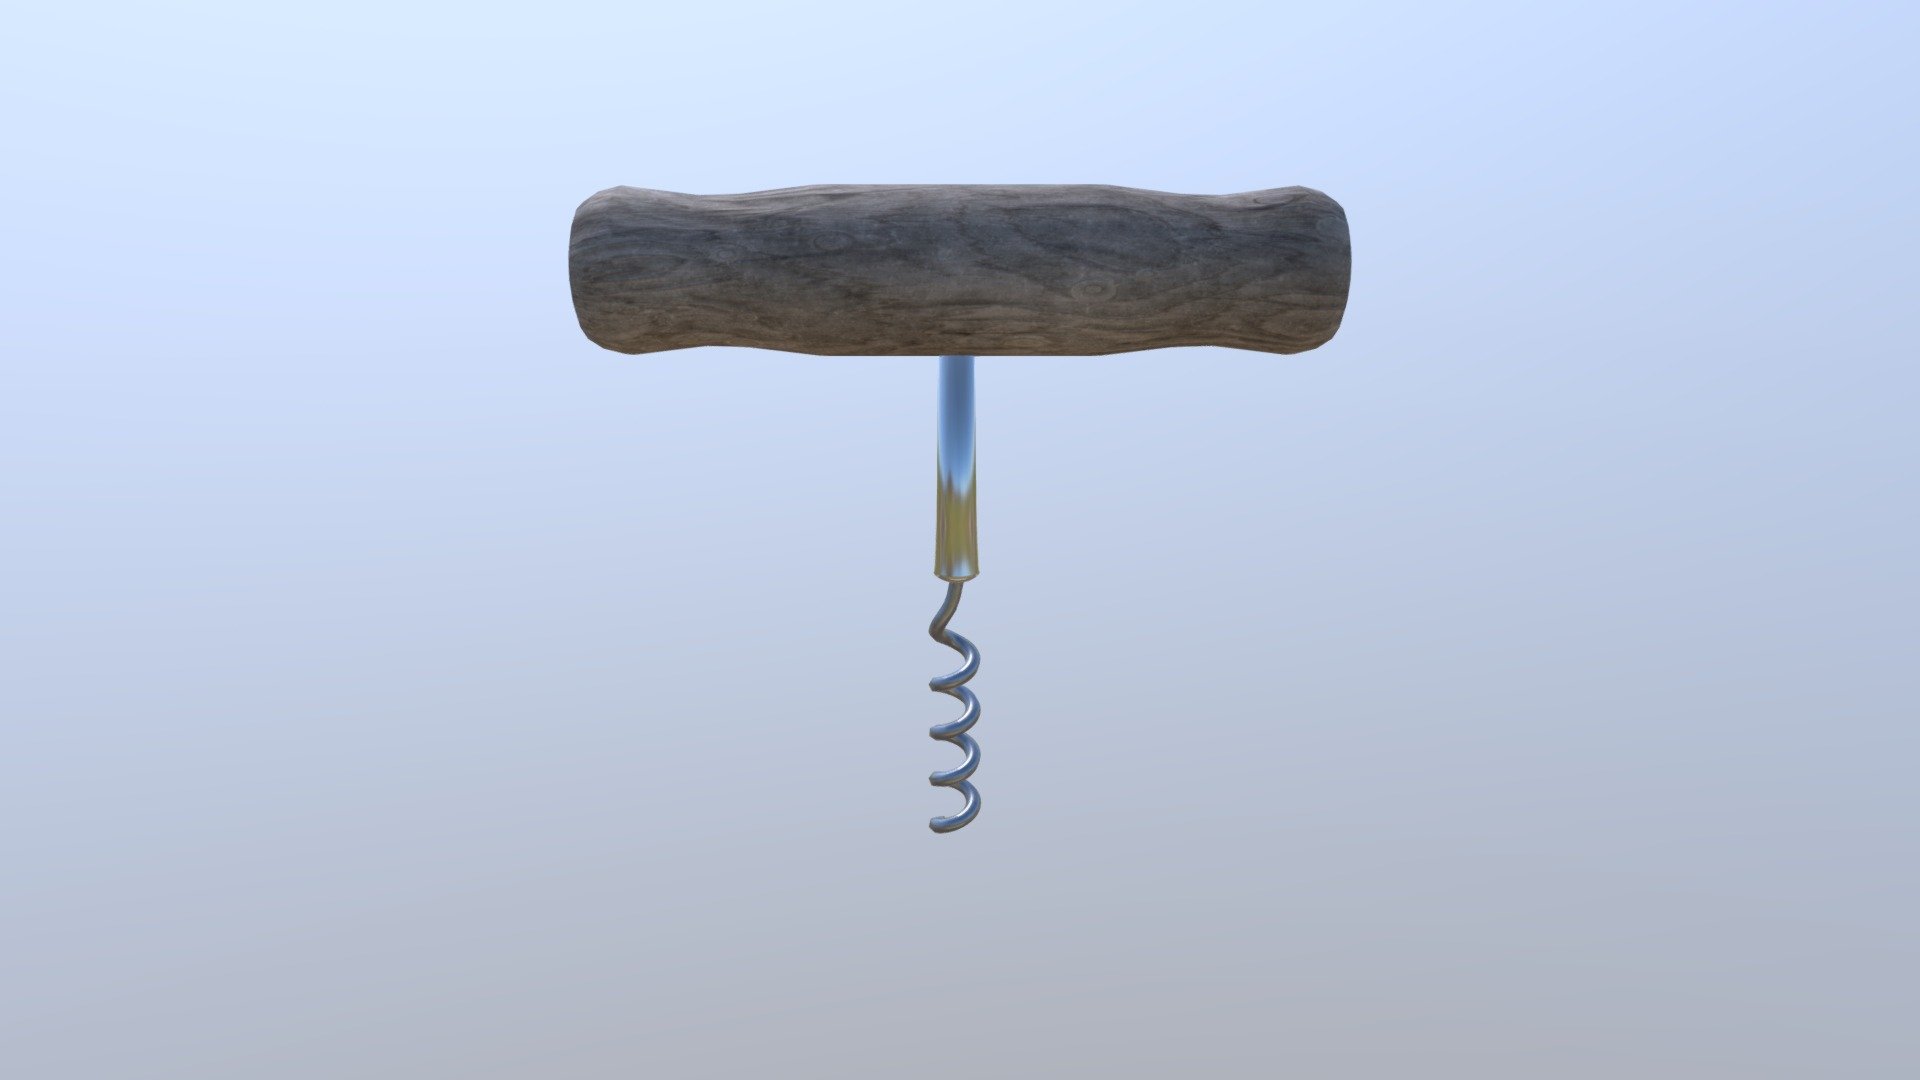 Wooden and two metal composite corkscrew